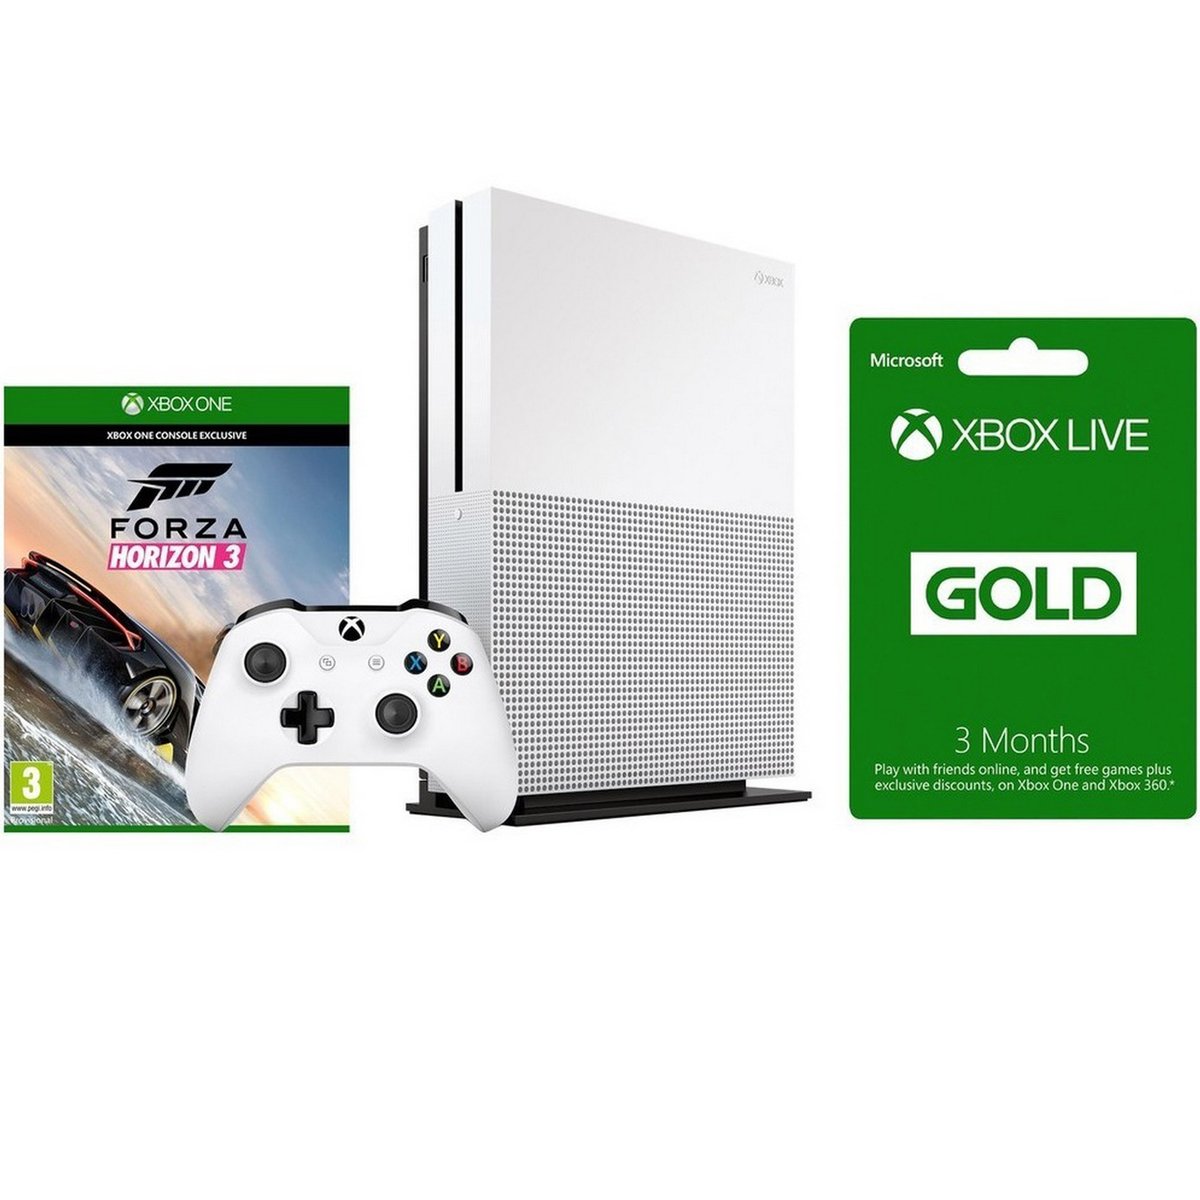 Xbox One  S Console 500GB + Forza Horizon 3 + 3 months live gold membership Card